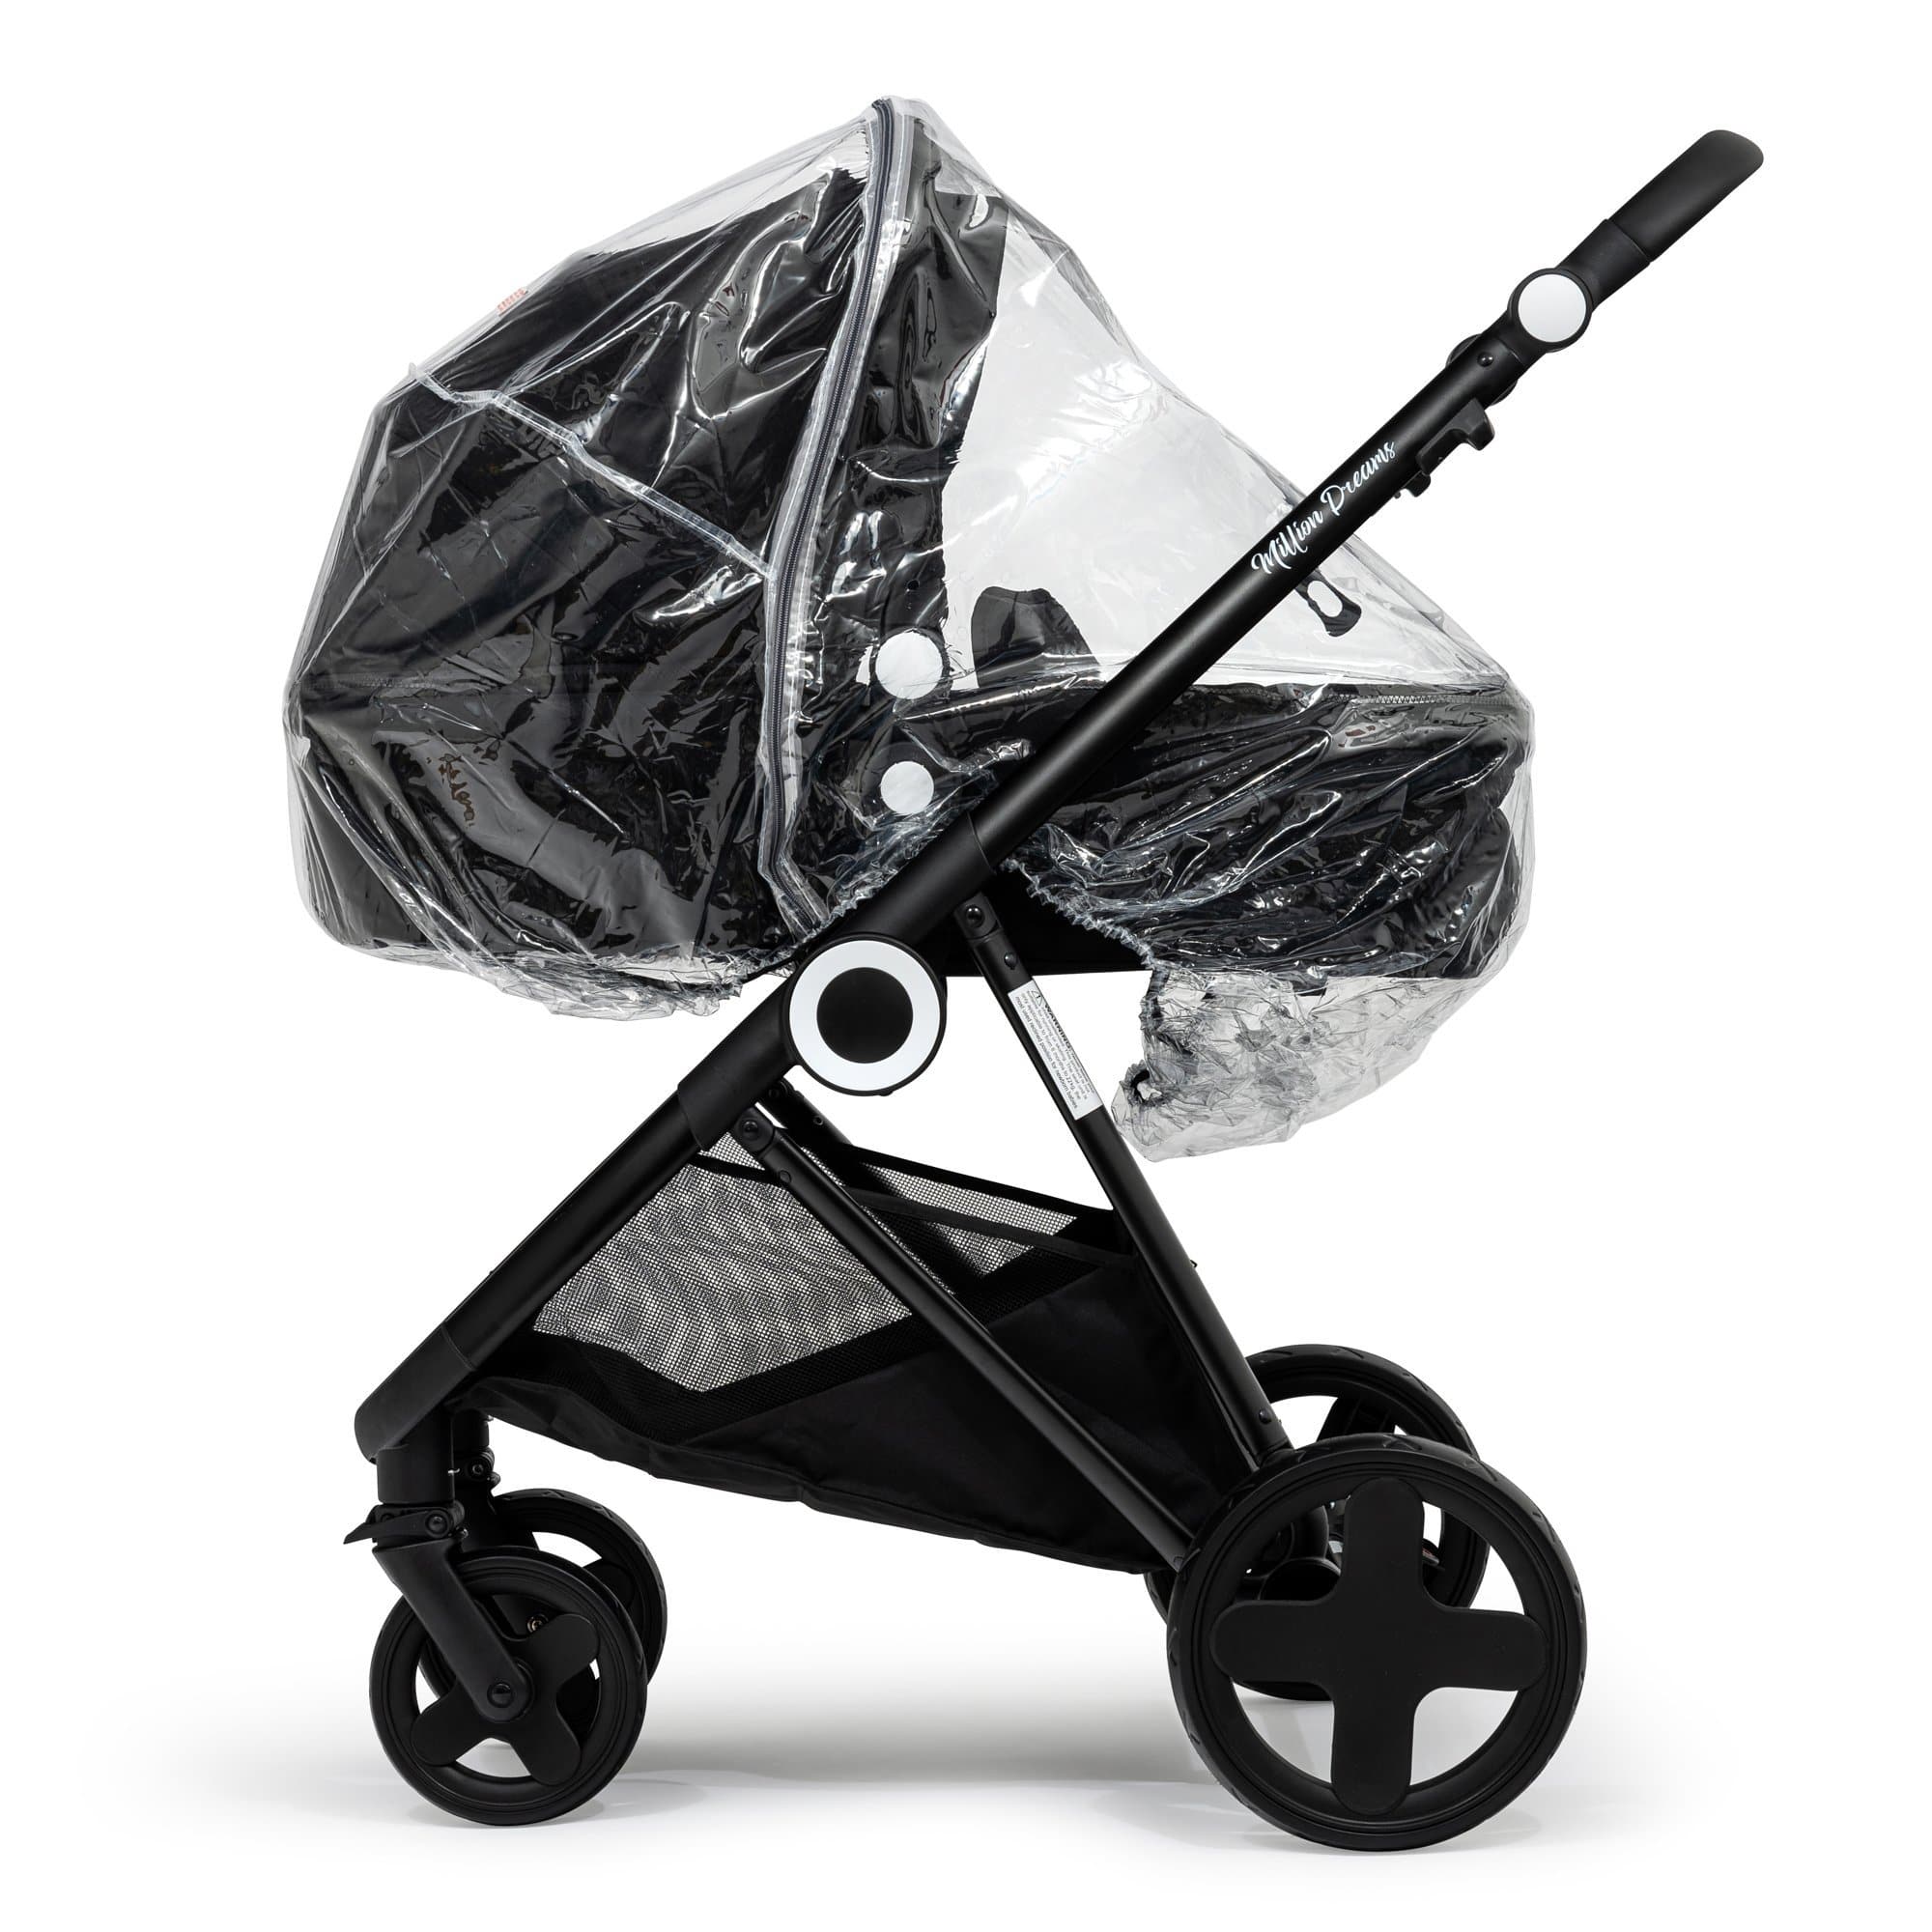 2 in 1 Rain Cover Compatible with XTS - Fits All Models - For Your Little One